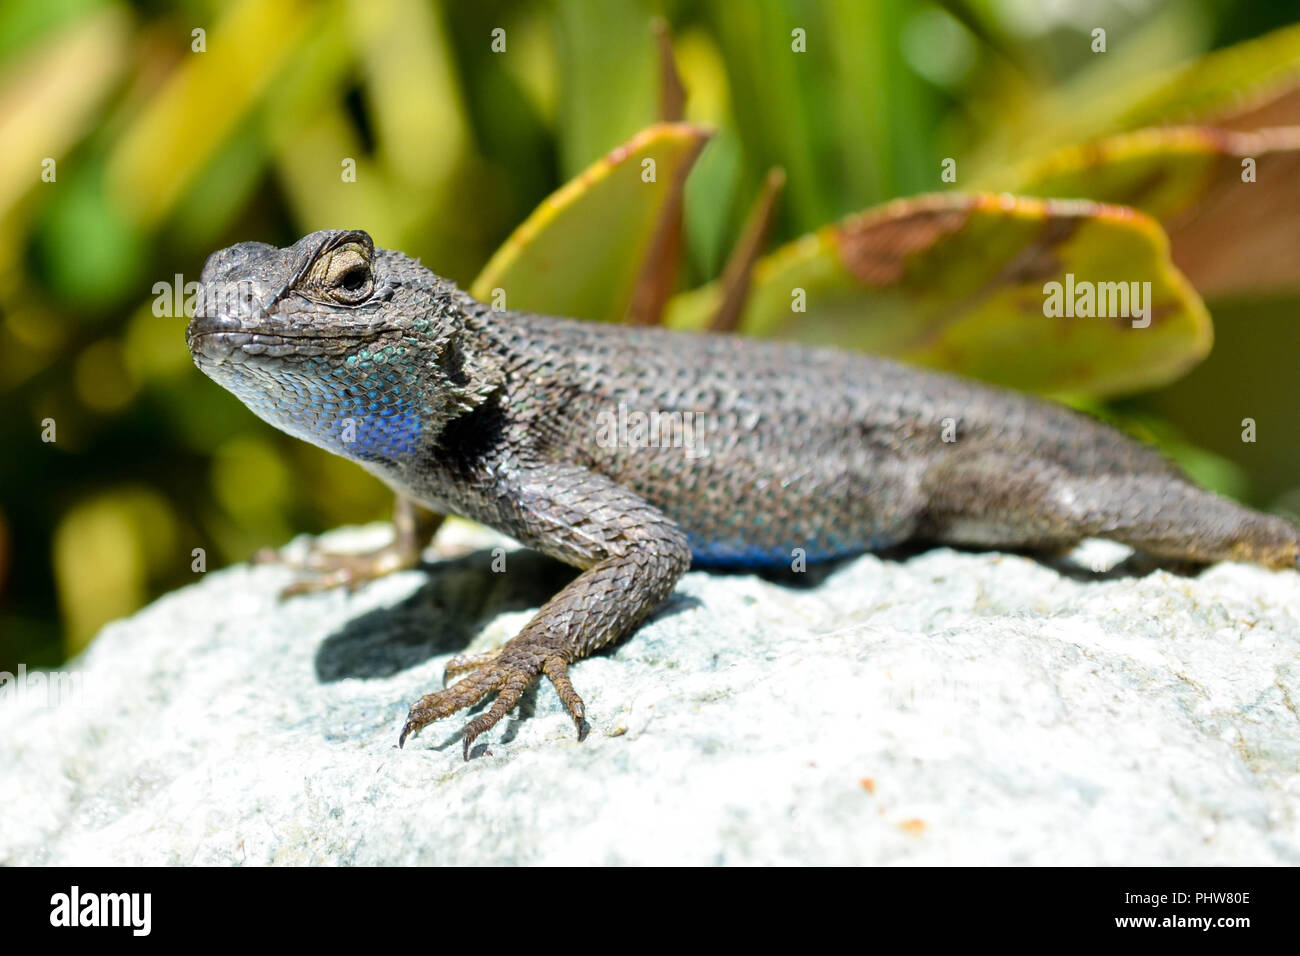 https://c8.alamy.com/comp/PHW80E/a-western-fence-lizard-sceloporus-occidentalis-sunning-itself-on-a-rock-and-showing-off-its-blue-throat-and-belly-in-san-diego-california-usa-PHW80E.jpg